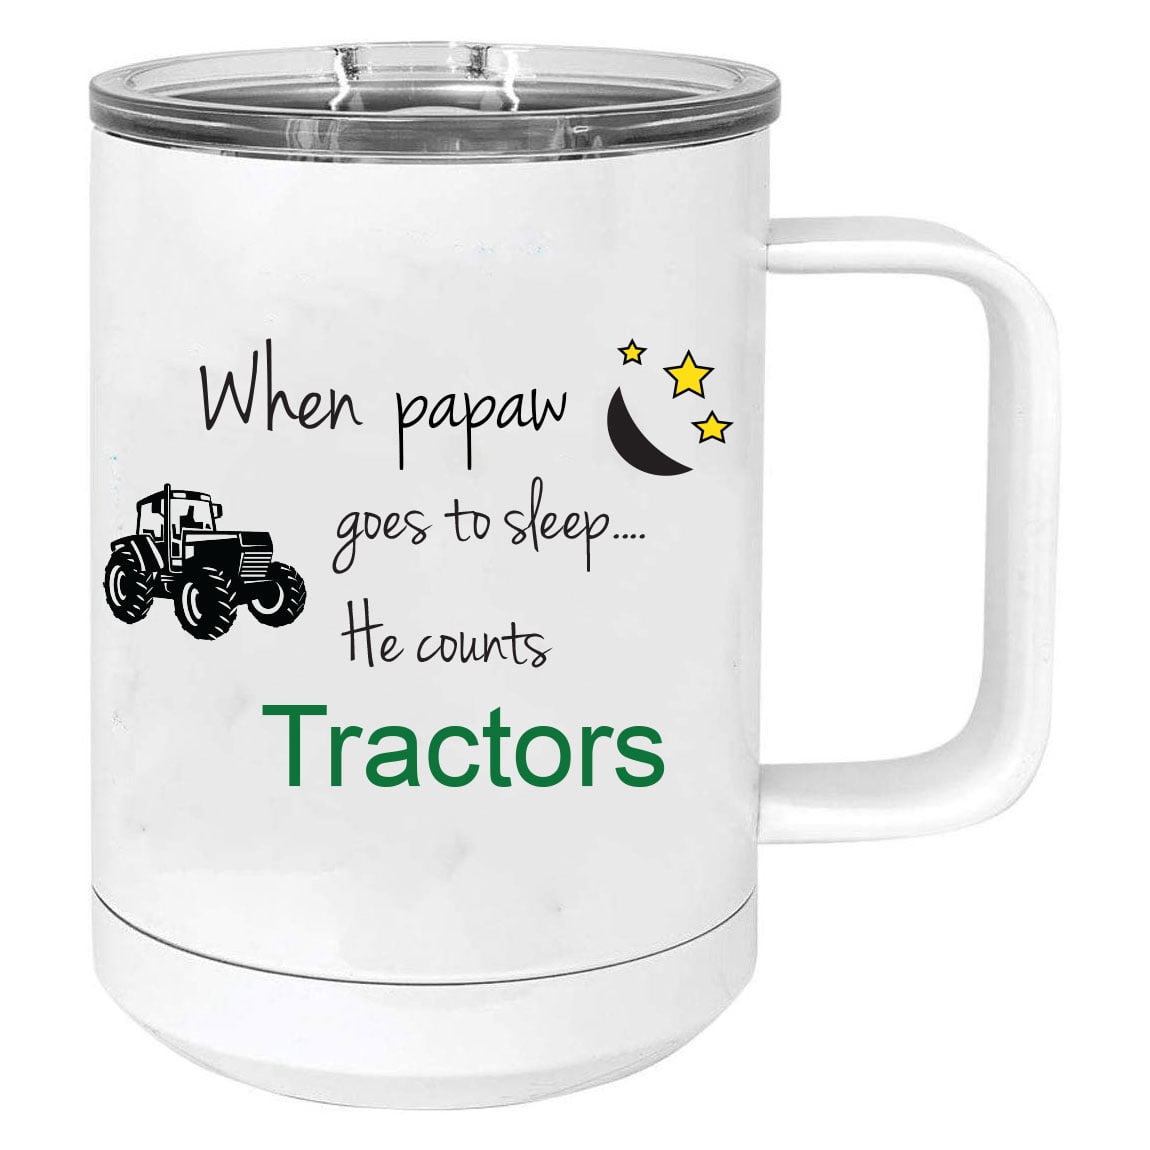 When Papaw goes to sleep he counts tractors Stainless Steel Vacuum Insulated 15 Oz Travel Coffee Mug with Slider Lid, White